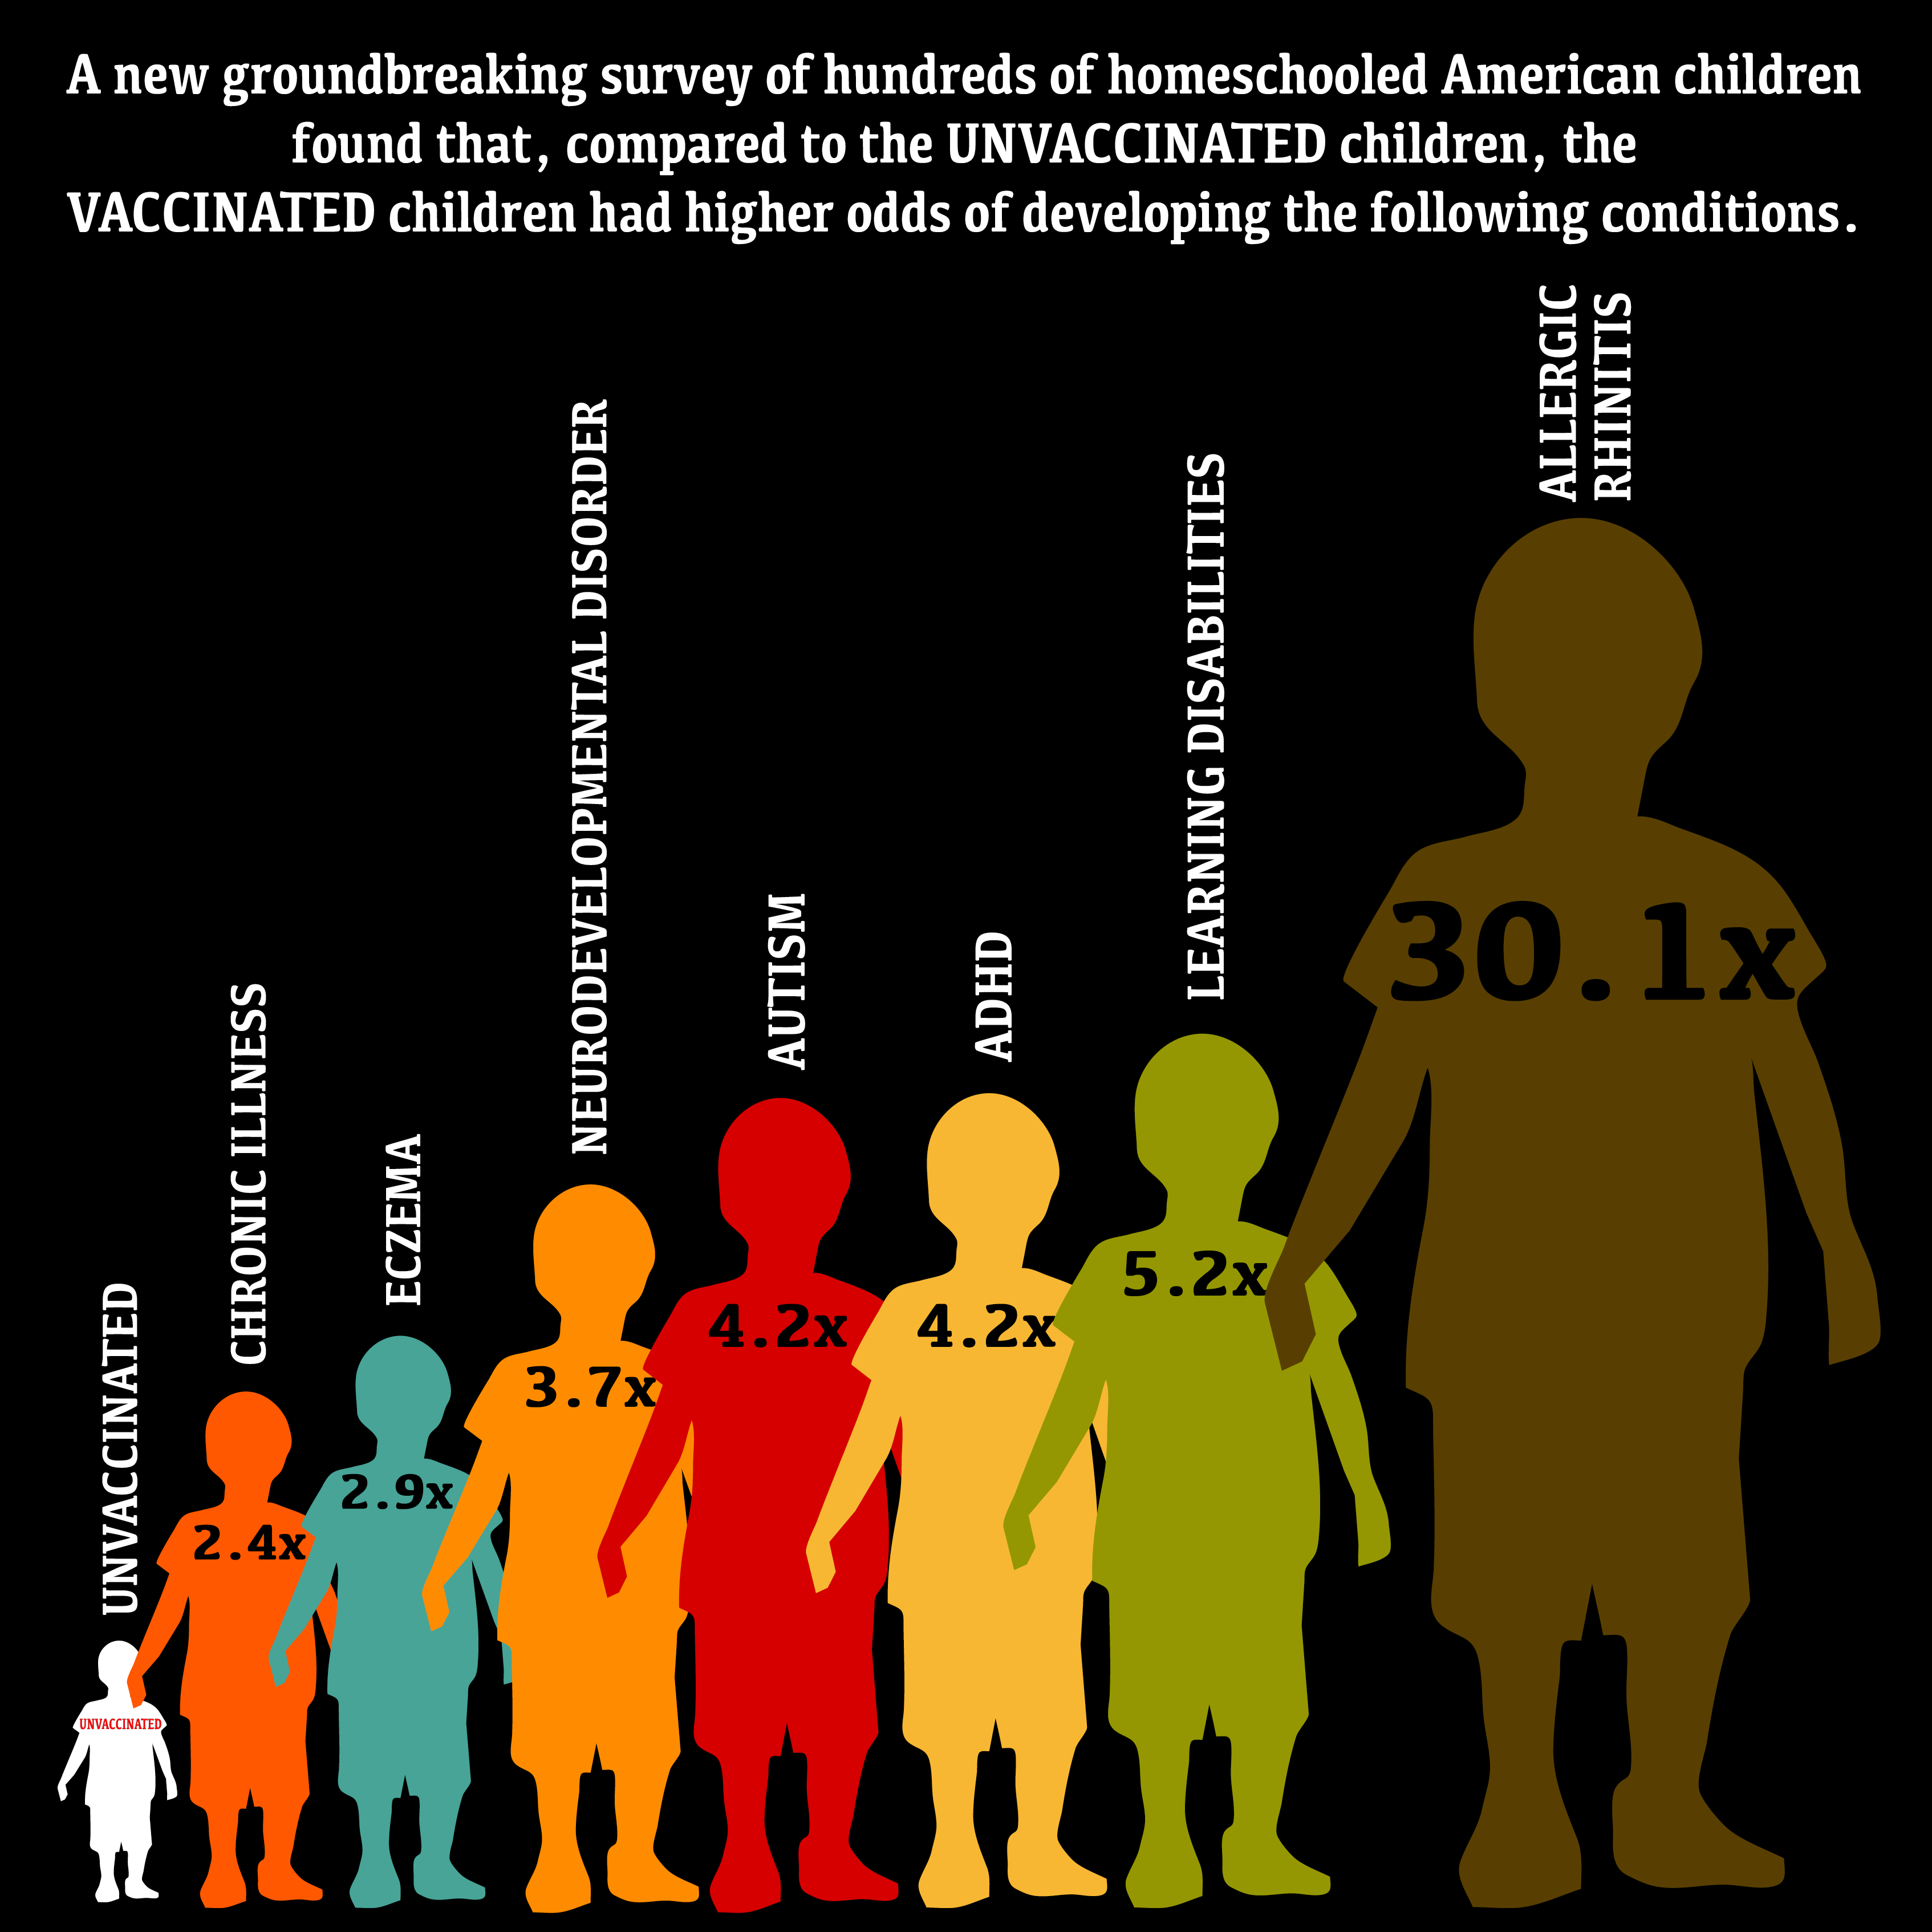 Analysis of health outcomes in vaccinated and unvaccinated children